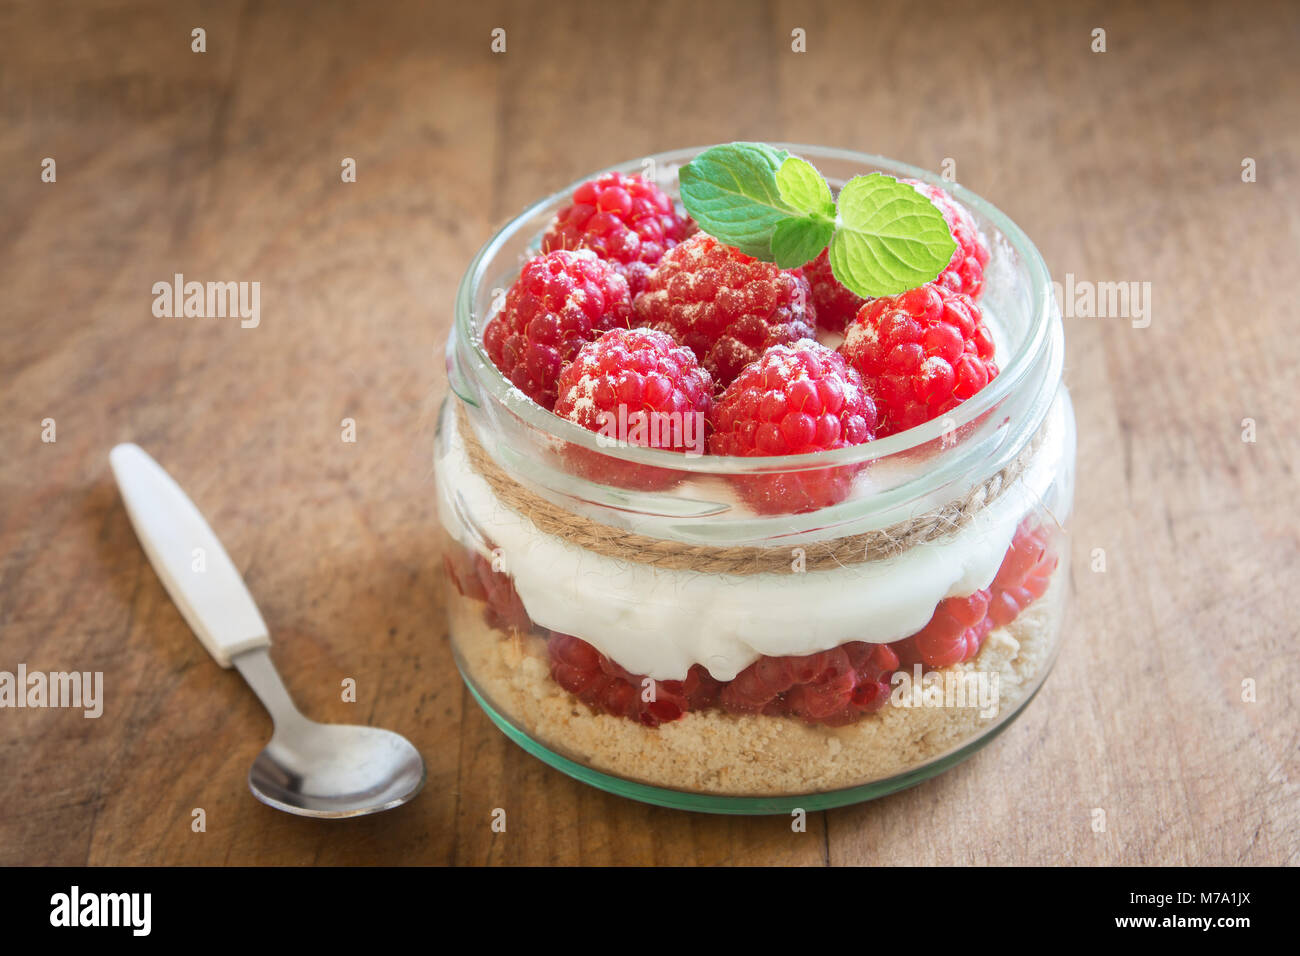 Raspberry cheesecake in glass jar with fresh raspberries and cream cheese  on wooden background. Healthy homemade summer berry layered dessert. Stock Photo